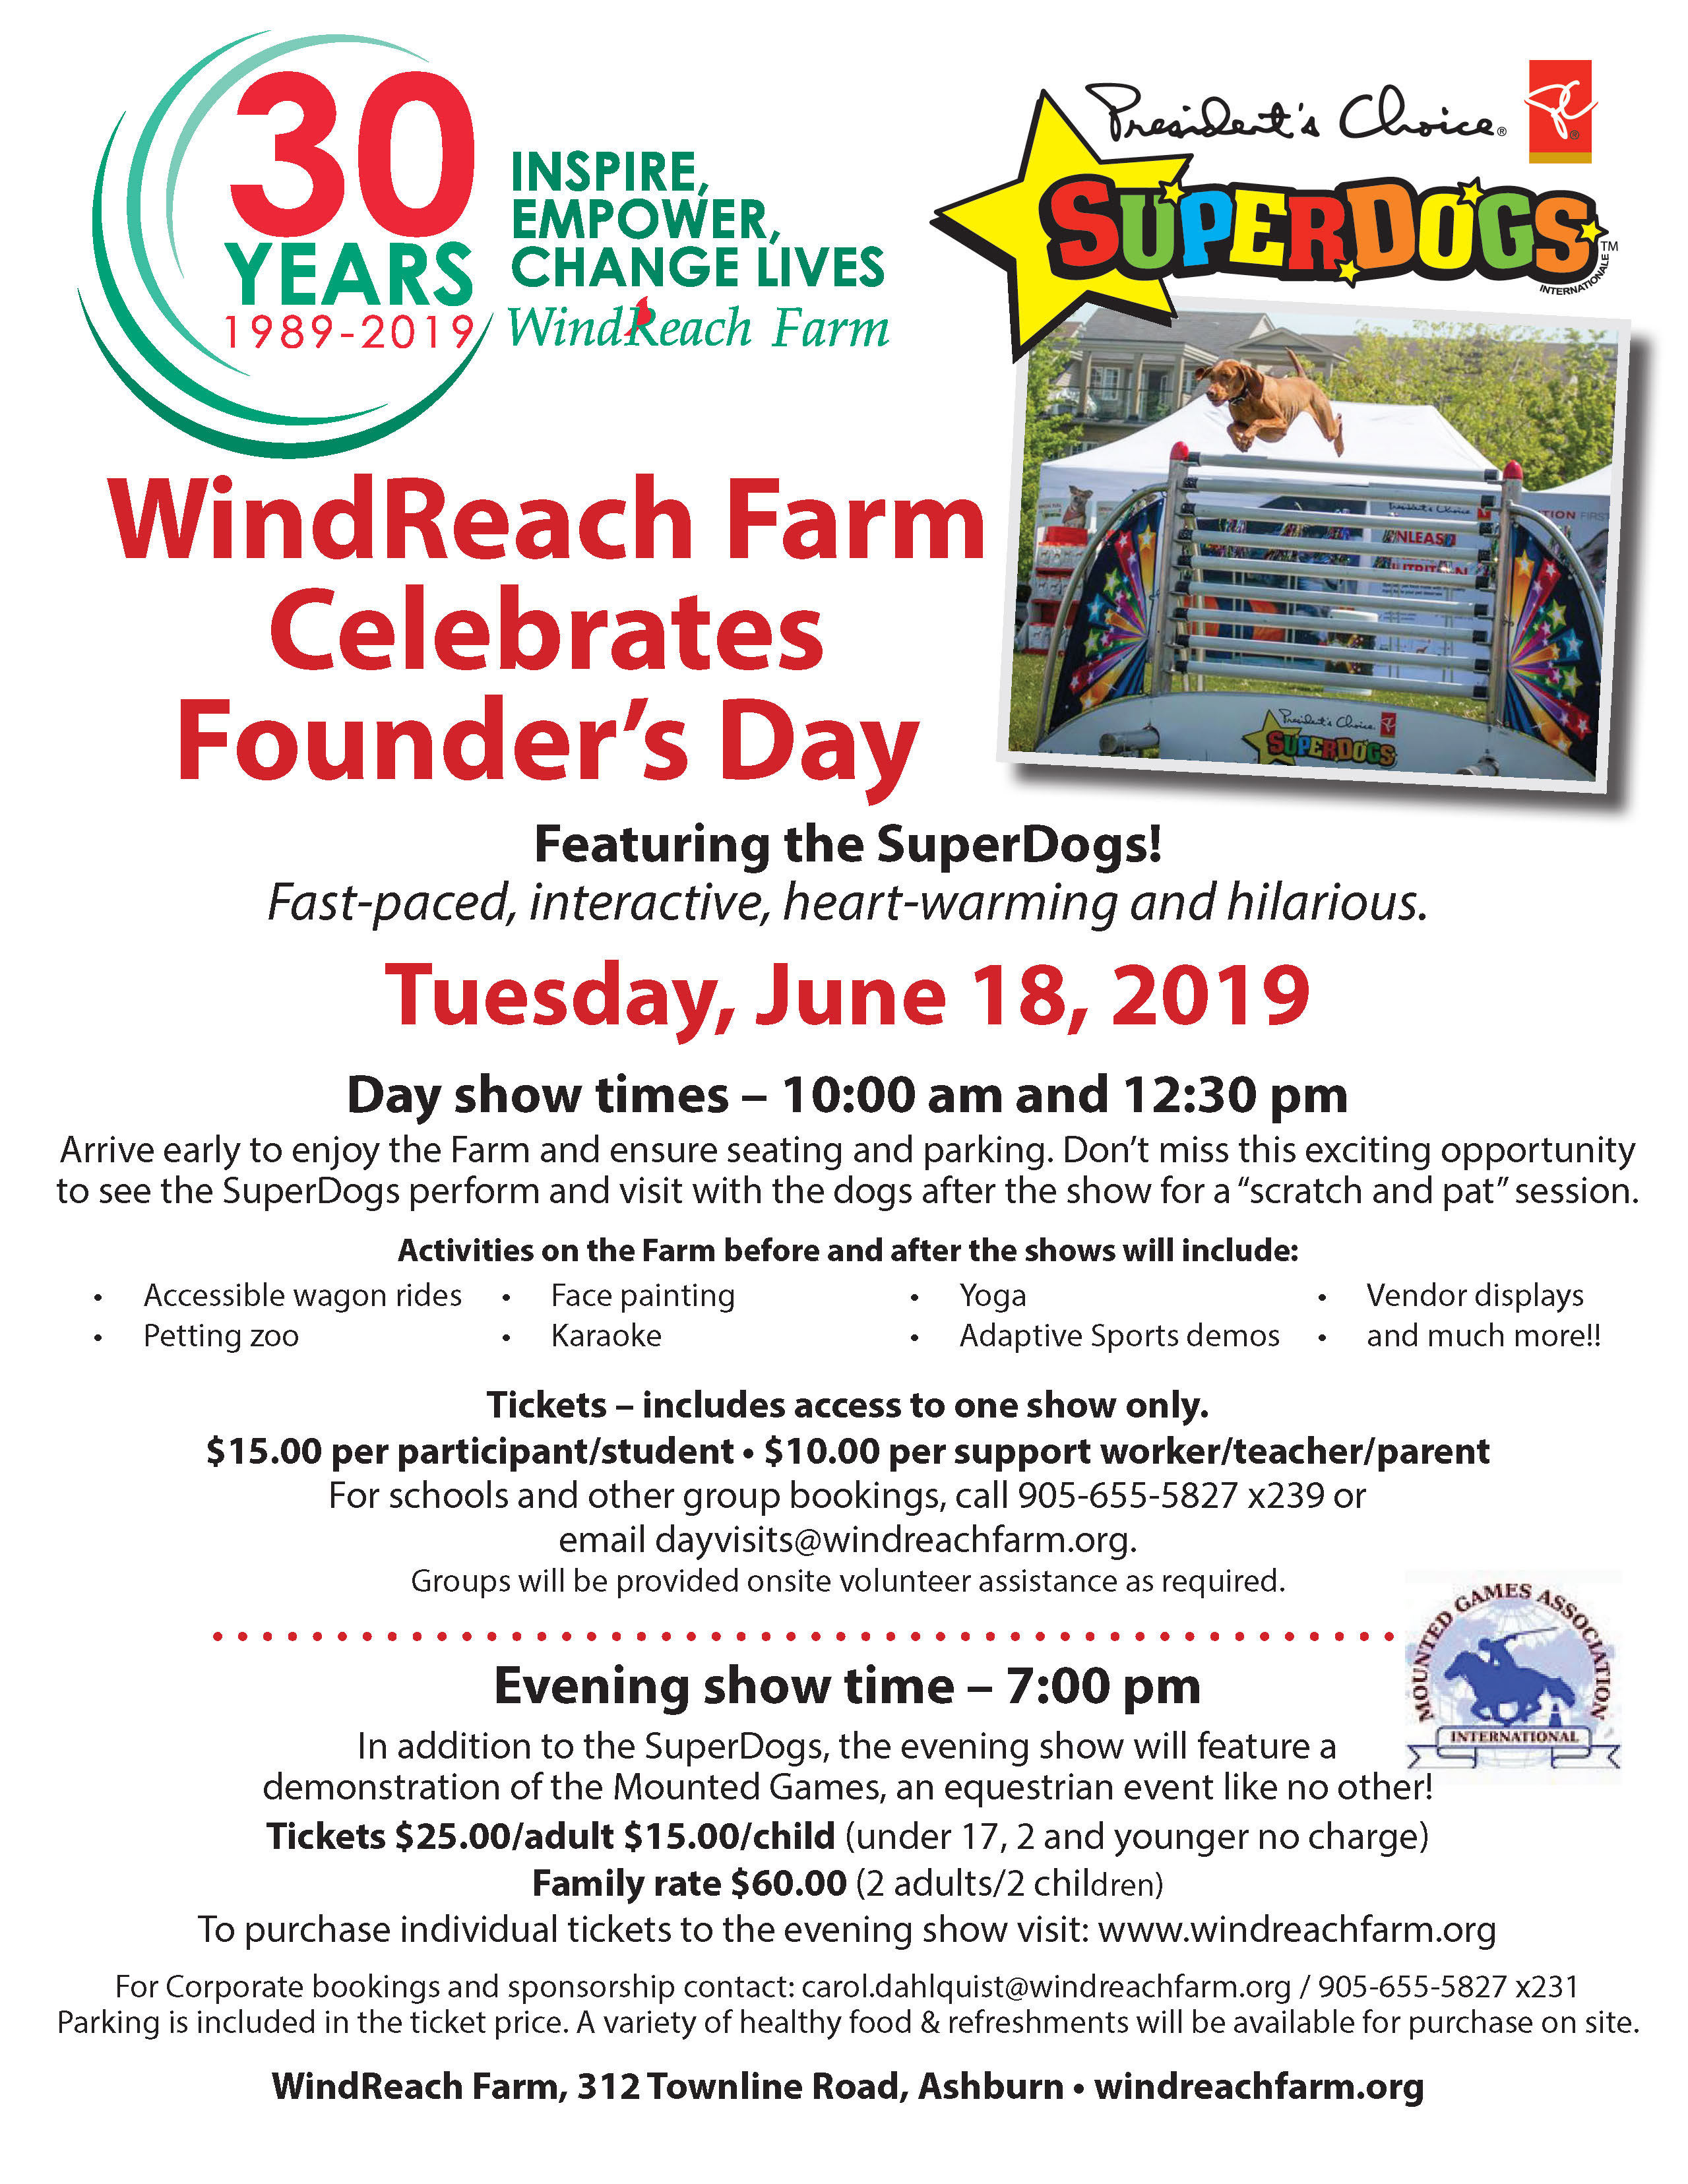 Windreach Founder's Day